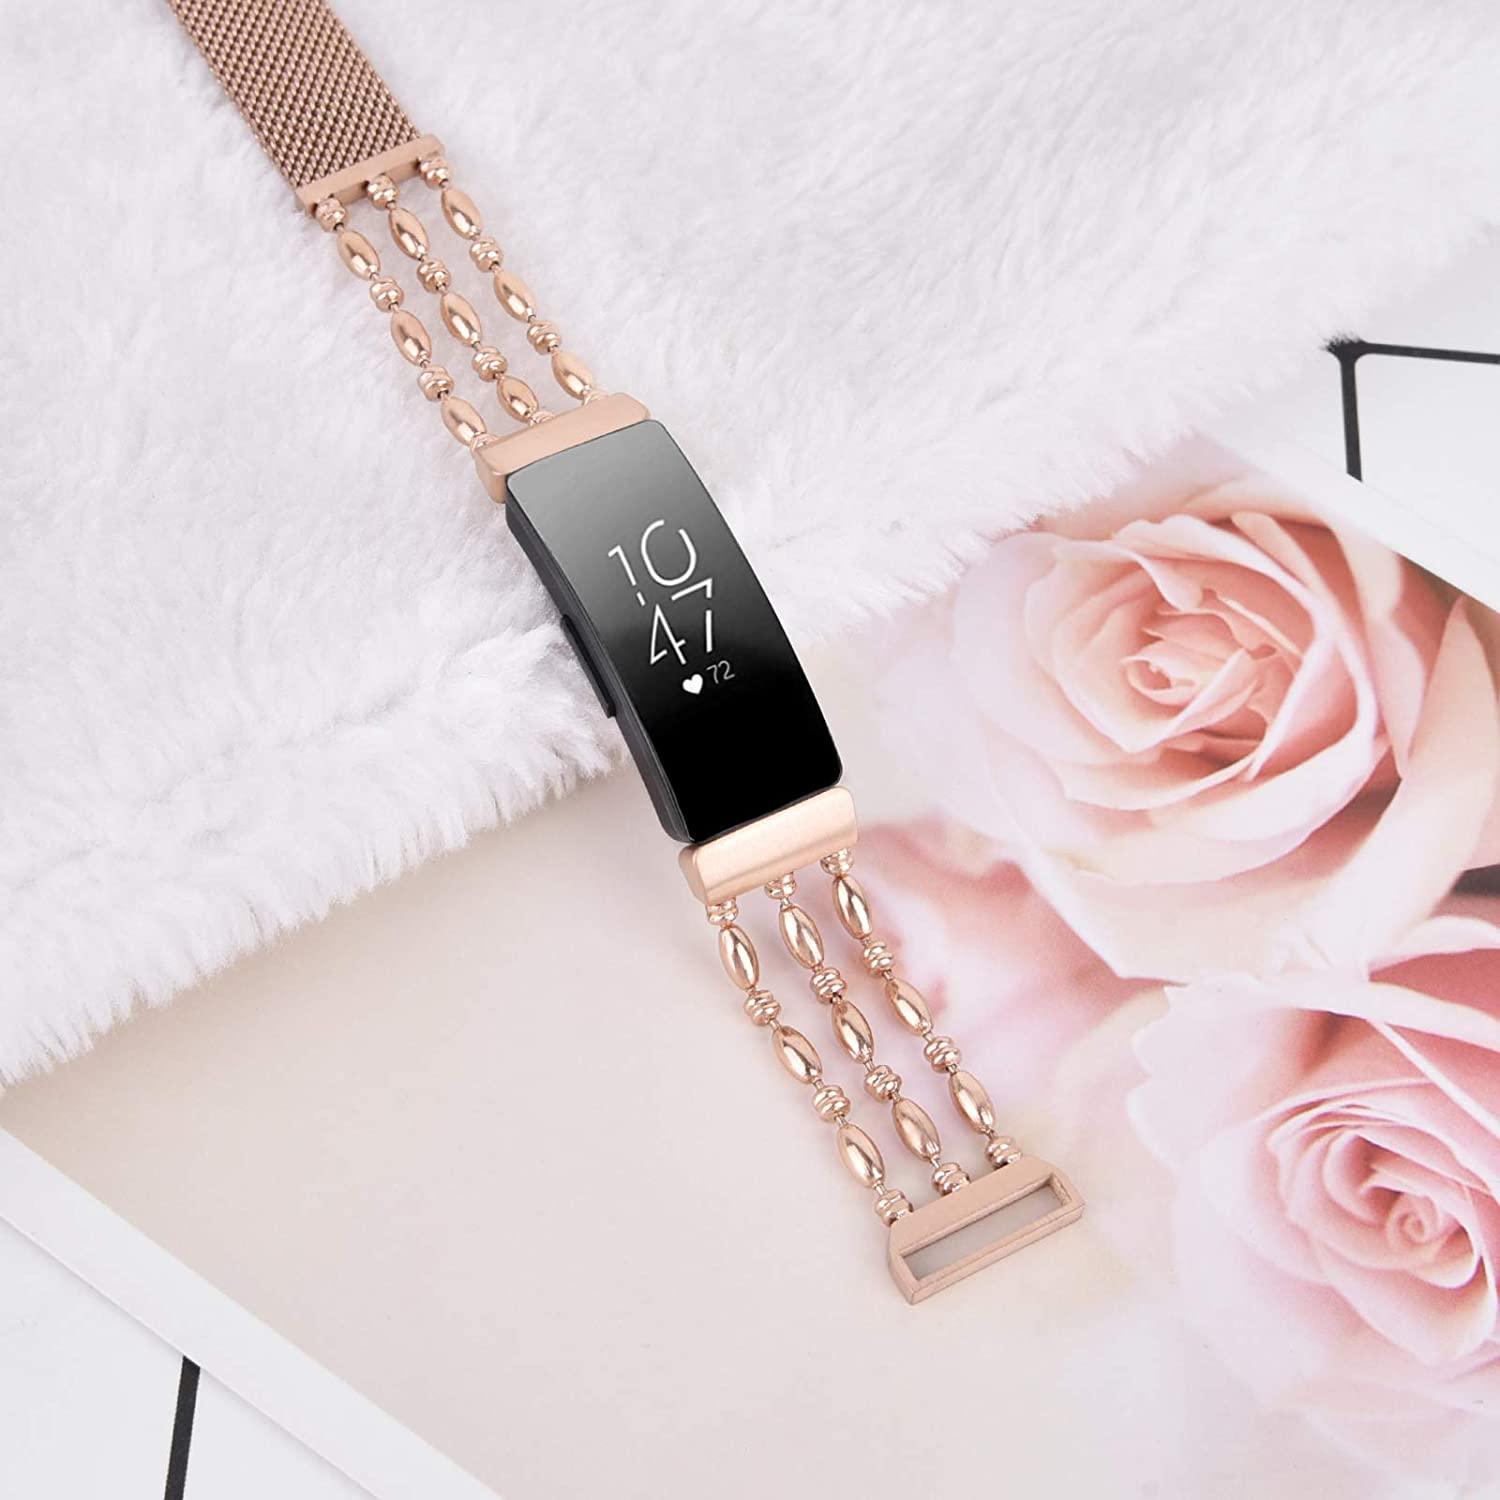 Fitbit Inspire 2 Band Gold & Leather Fitbit Inspire 2 Bracelet